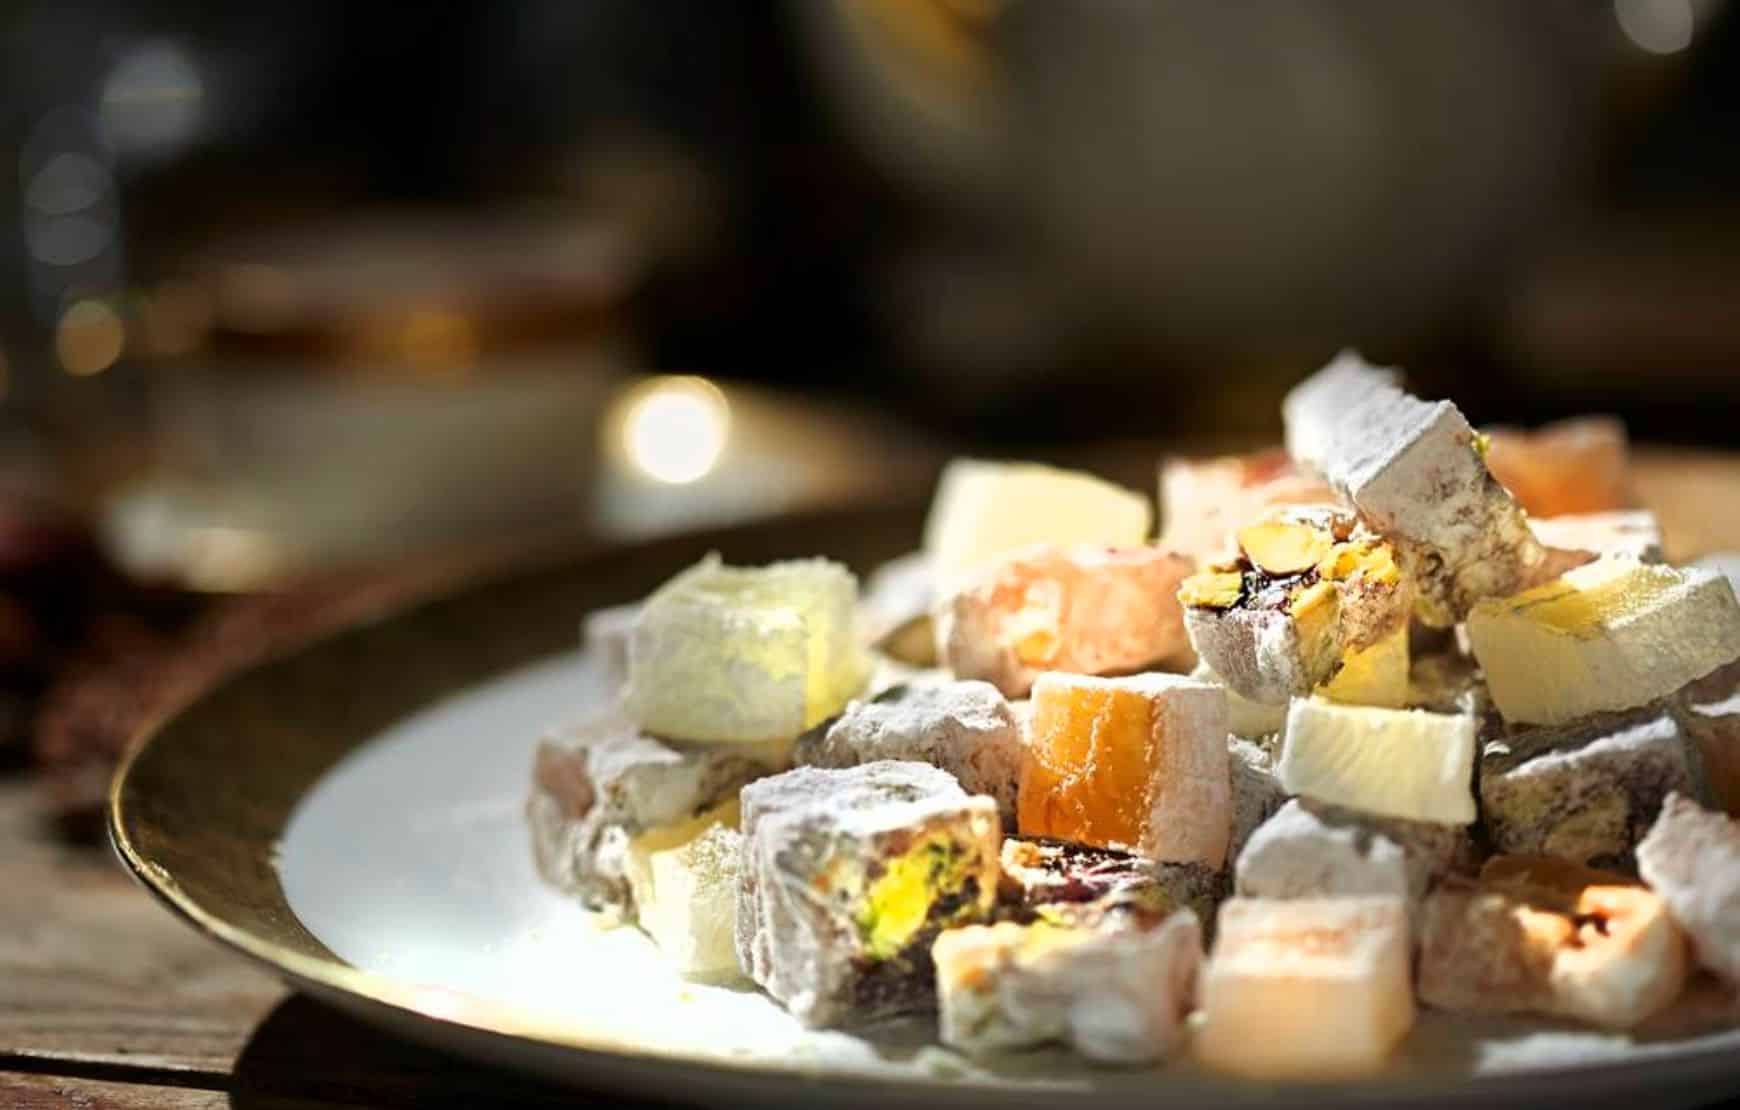 Enjoy turkish delight in our Daily Bursa Tour from Istanbul